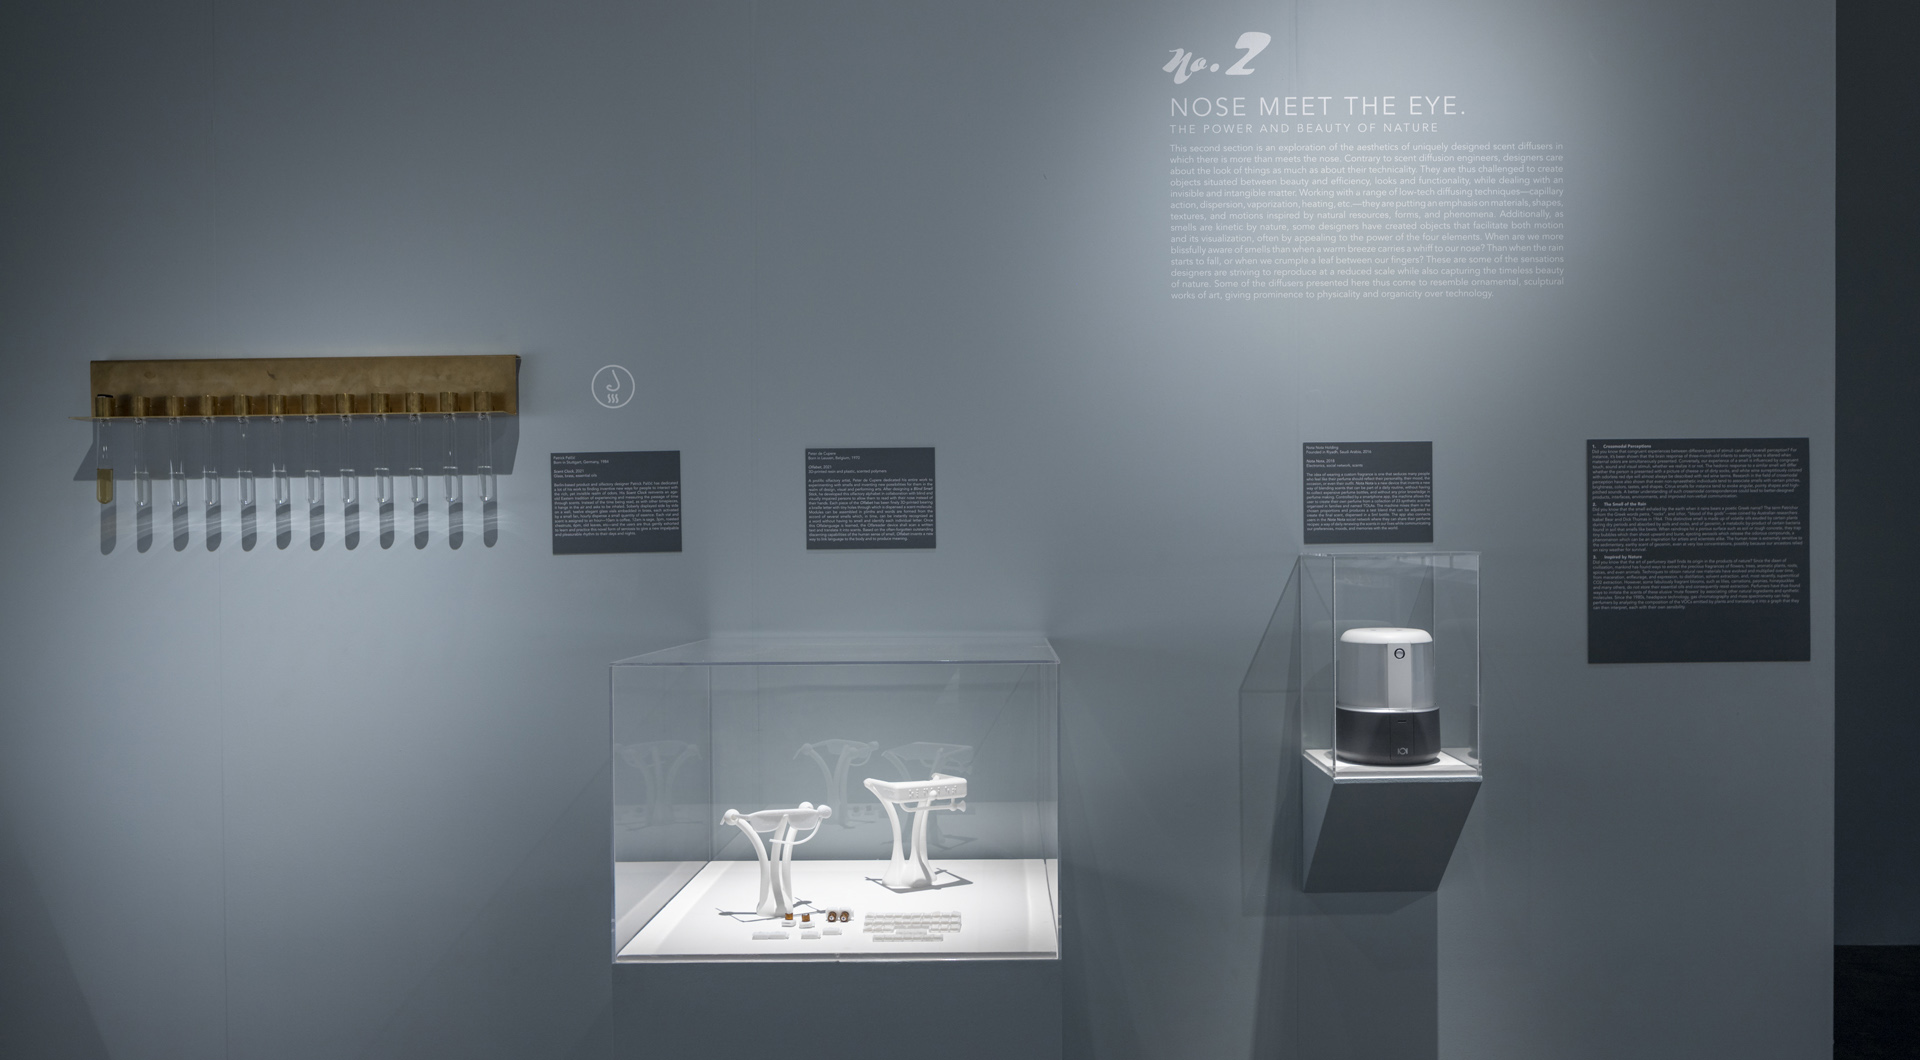 Exhibition photo glass cases and design objects